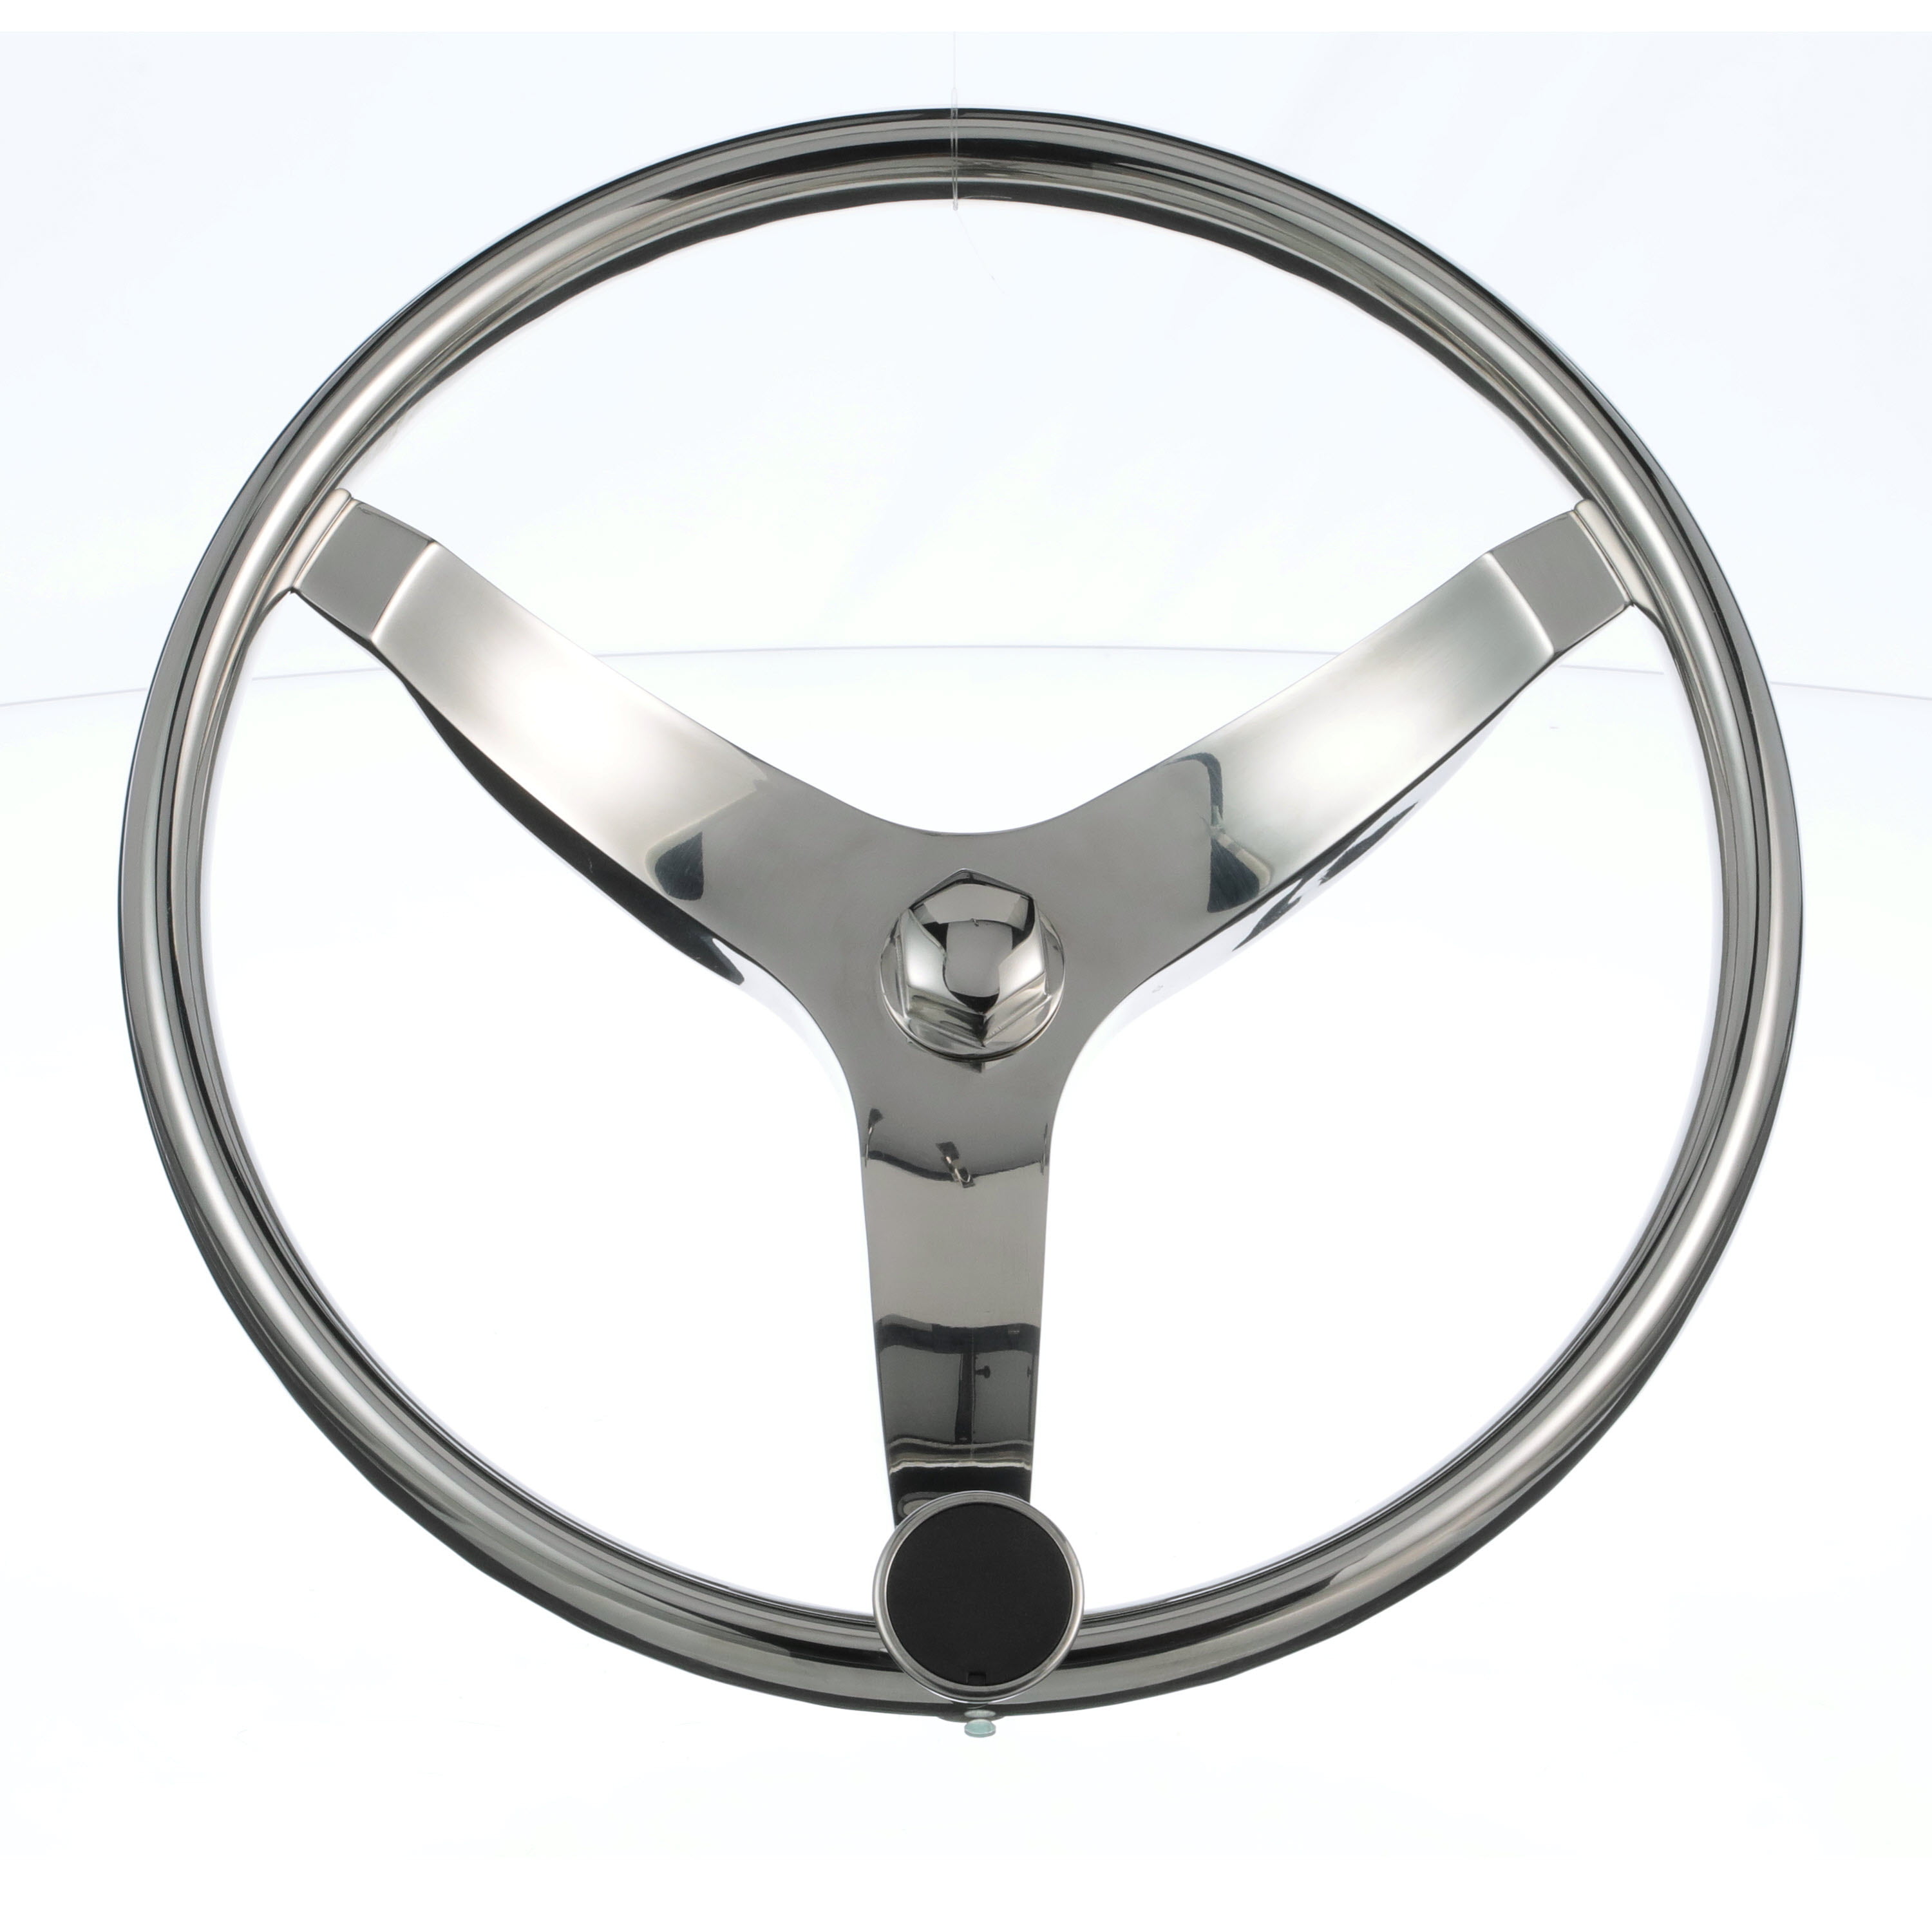 13.5 inch Sport Boat Steering Wheel Stainless Steel 5 Spoke with Tapered Knob 